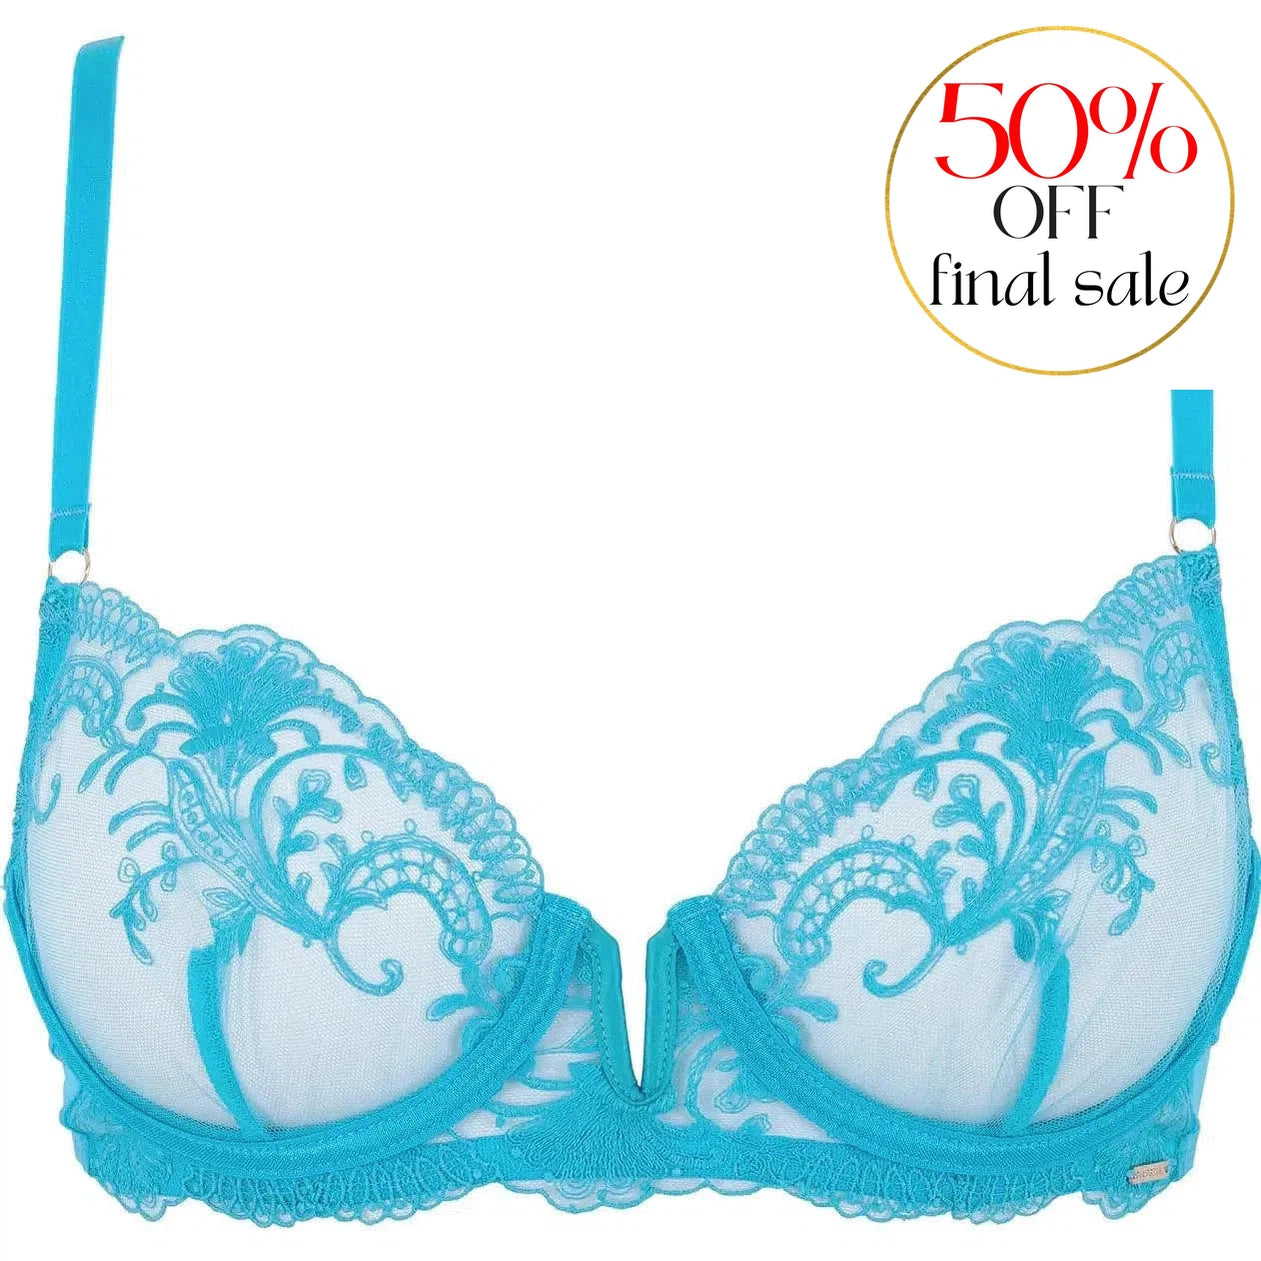 Bluebella Marseille Bra in Peacock Blue 41568-Bras-Bluebella-Peacock Blue-32-B-Anna Bella Fine Lingerie, Reveal Your Most Gorgeous Self!